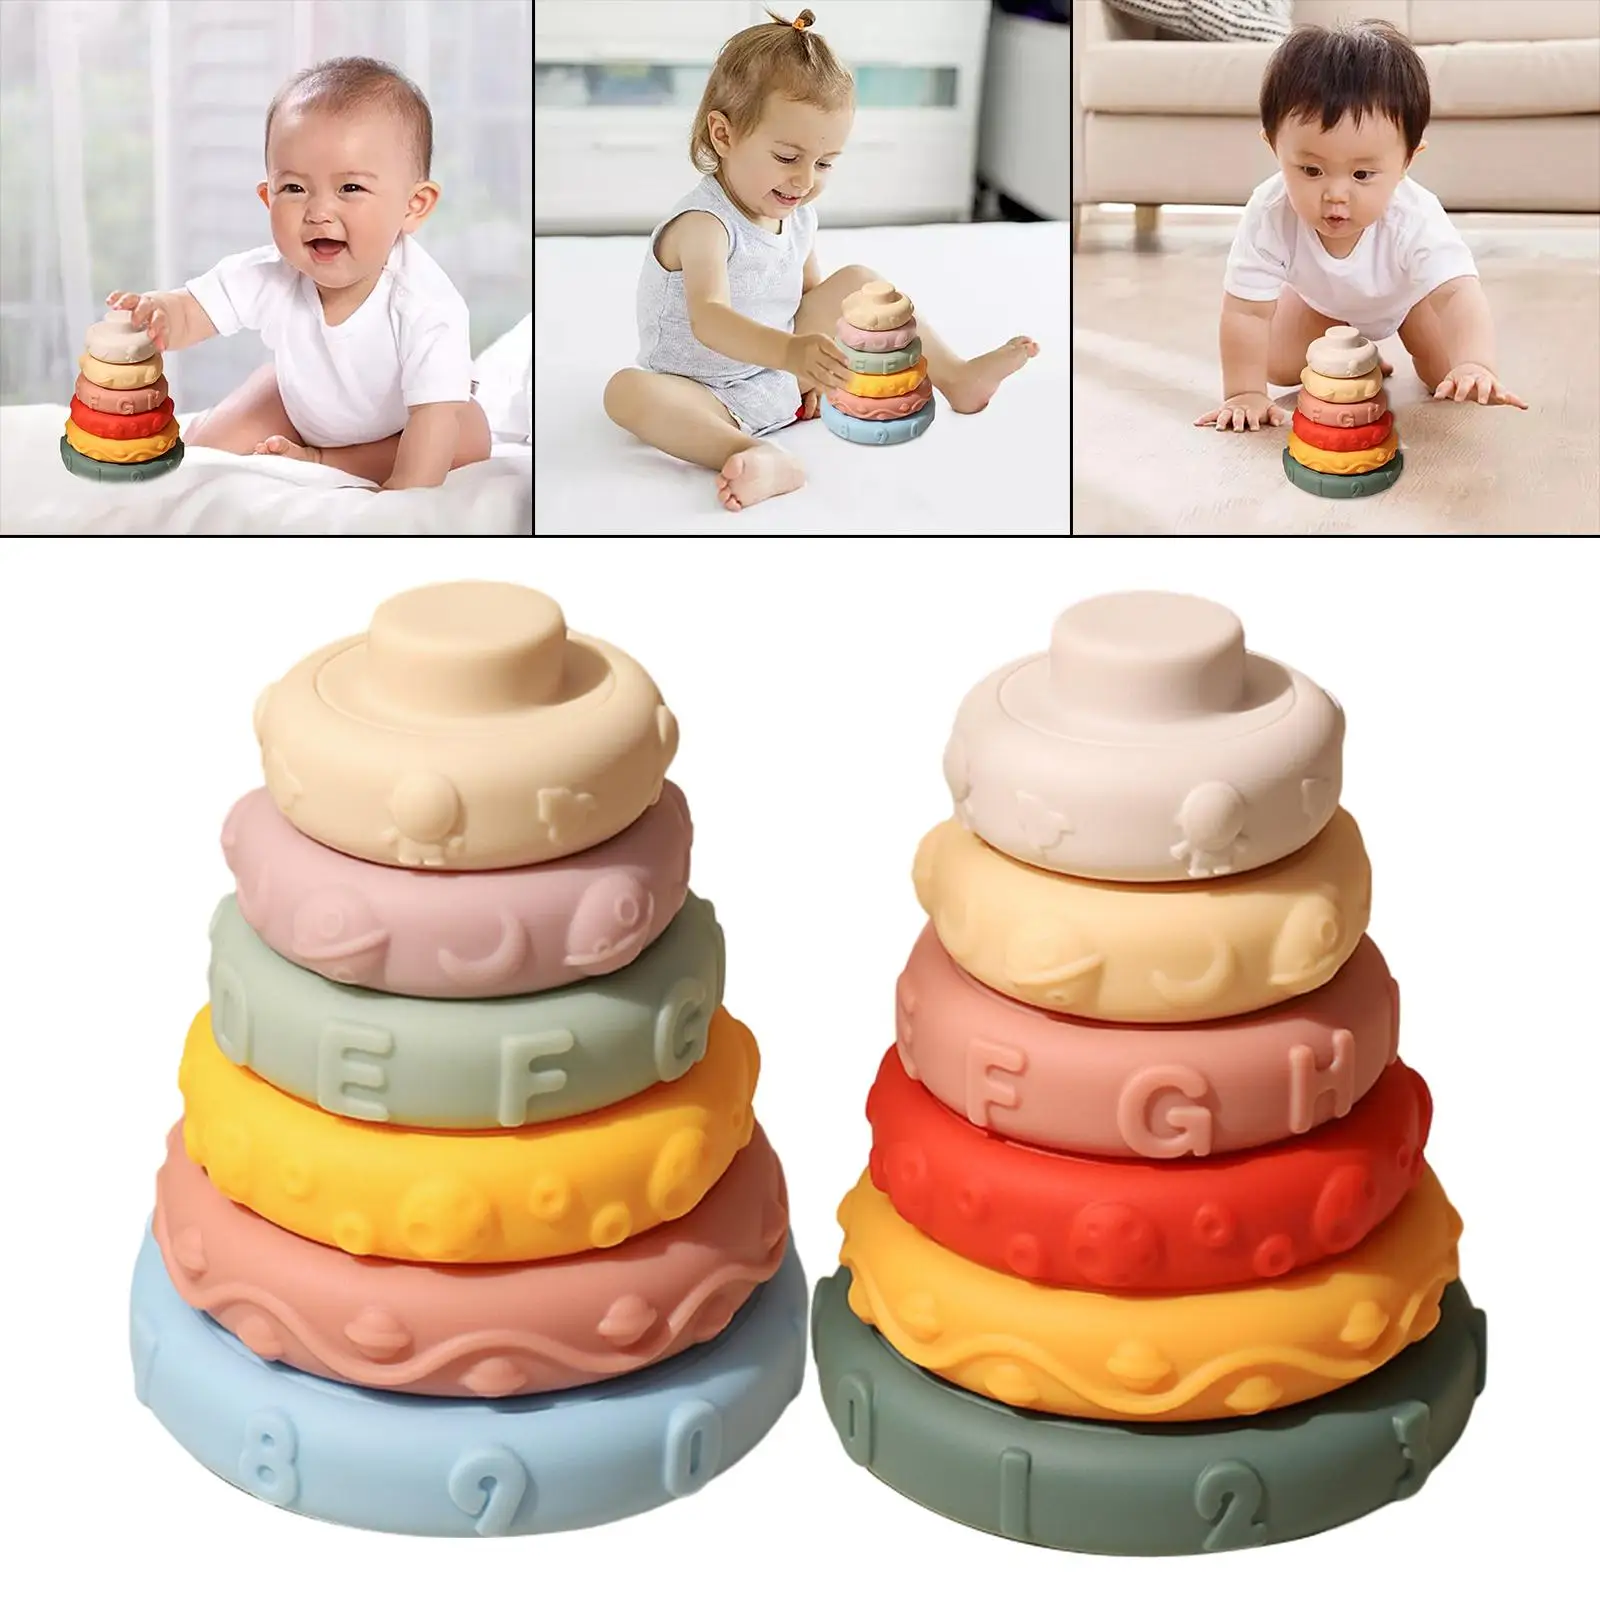 Silica Gel Stacking Rings Stacker Teether Hand-Eye Coordination Colorful Balancing Soft Sensory Toys for Toddler Boys Girls Kids